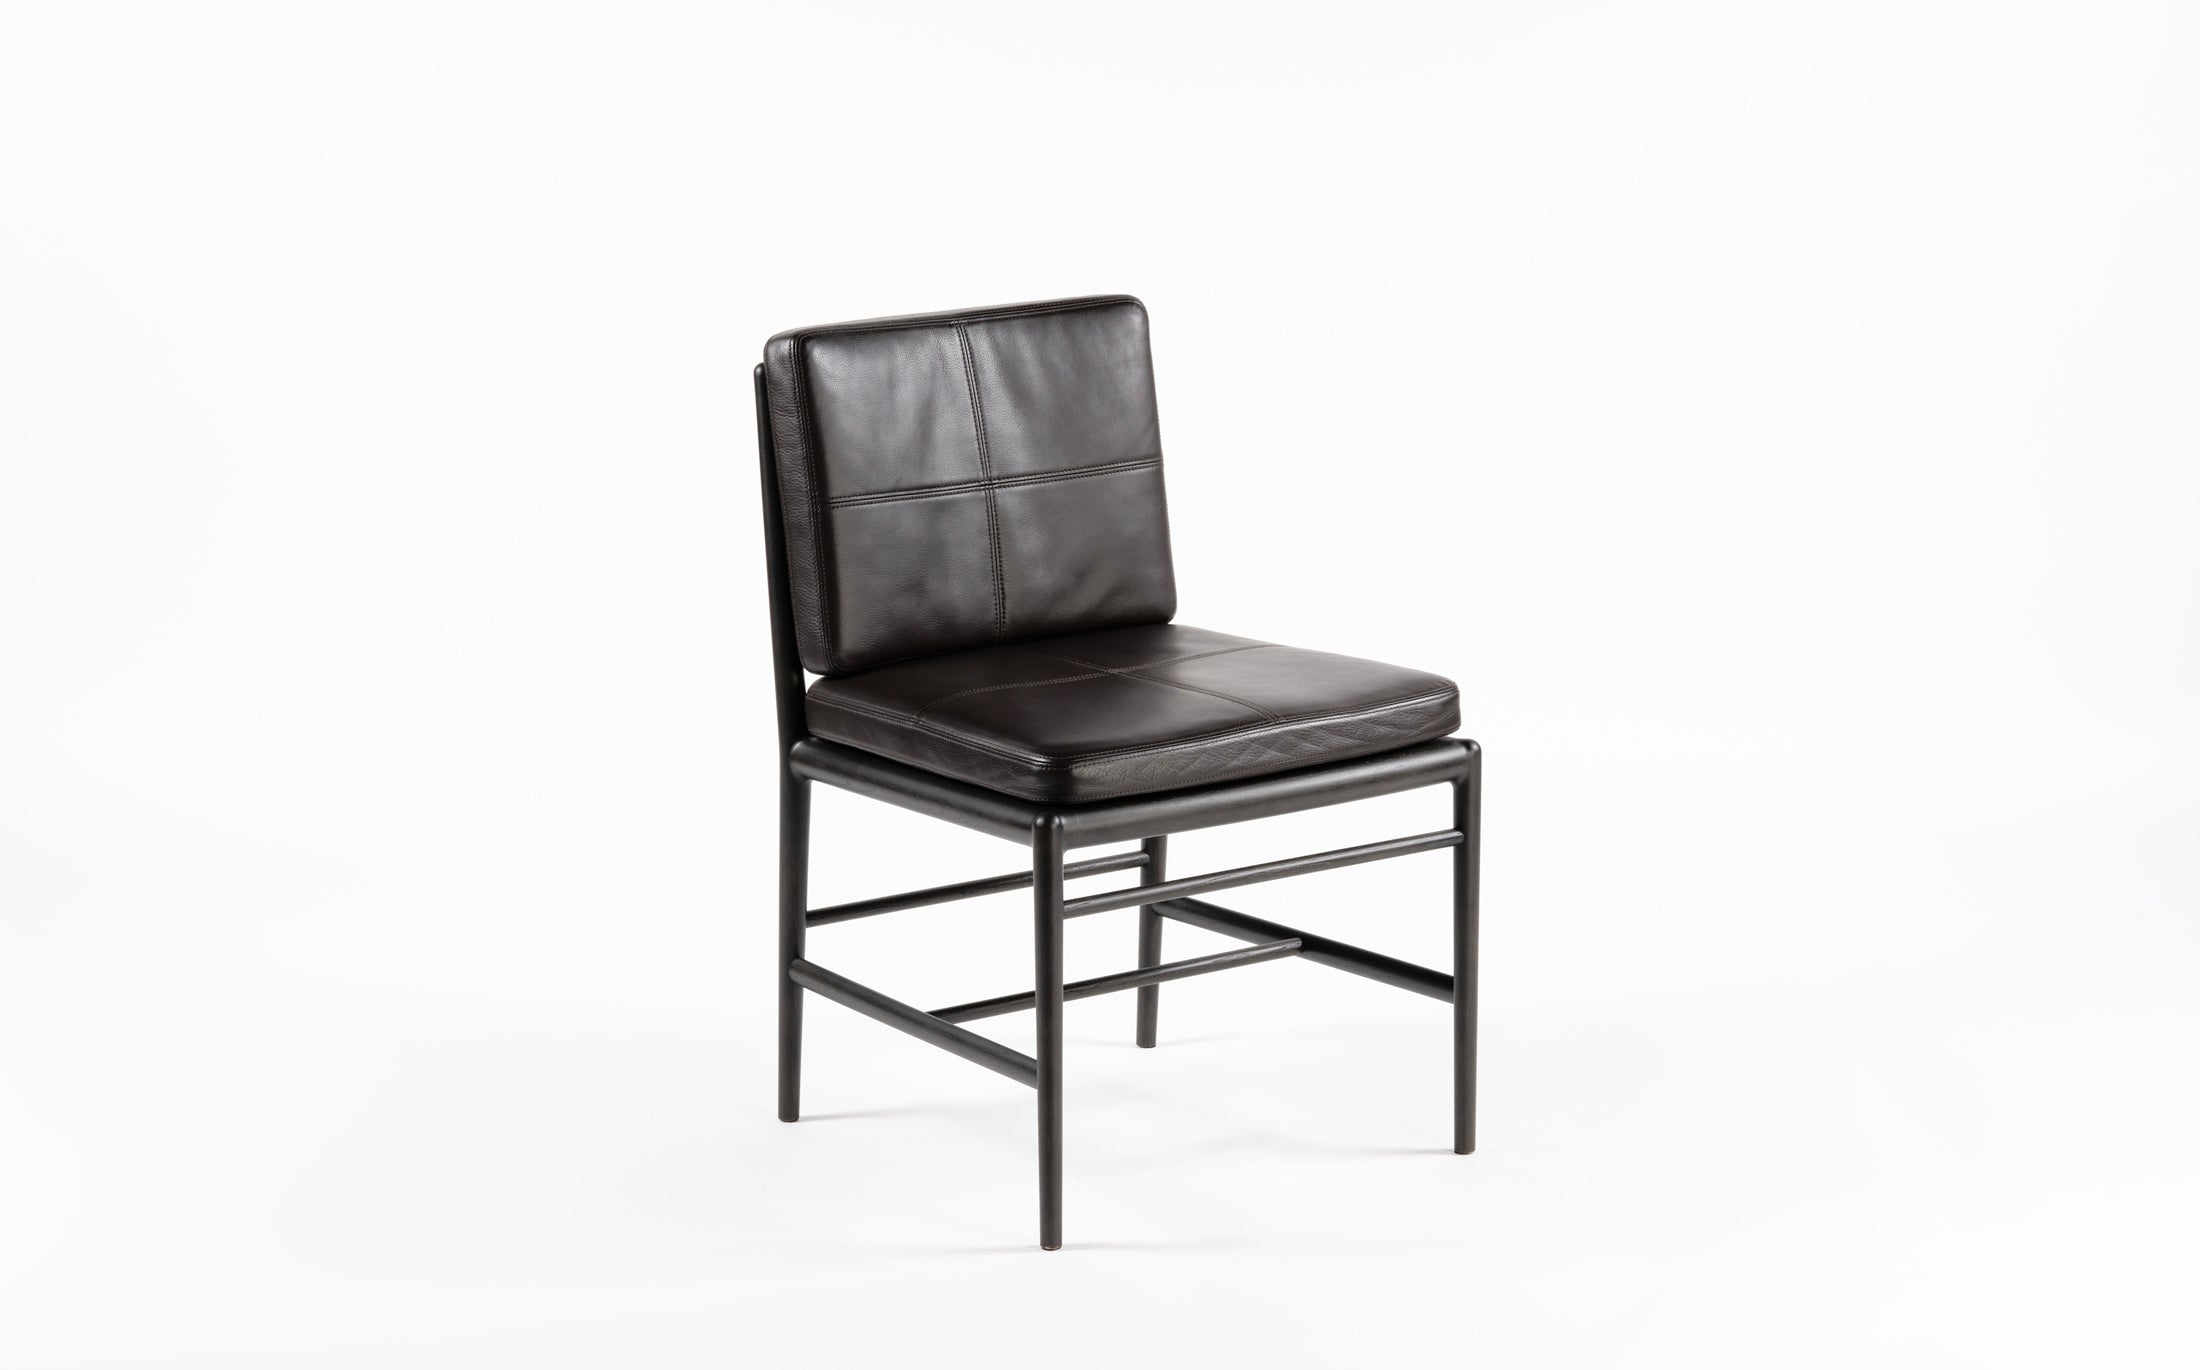 The sensitive comfortable side chair - Charcoal grey - SP20-431